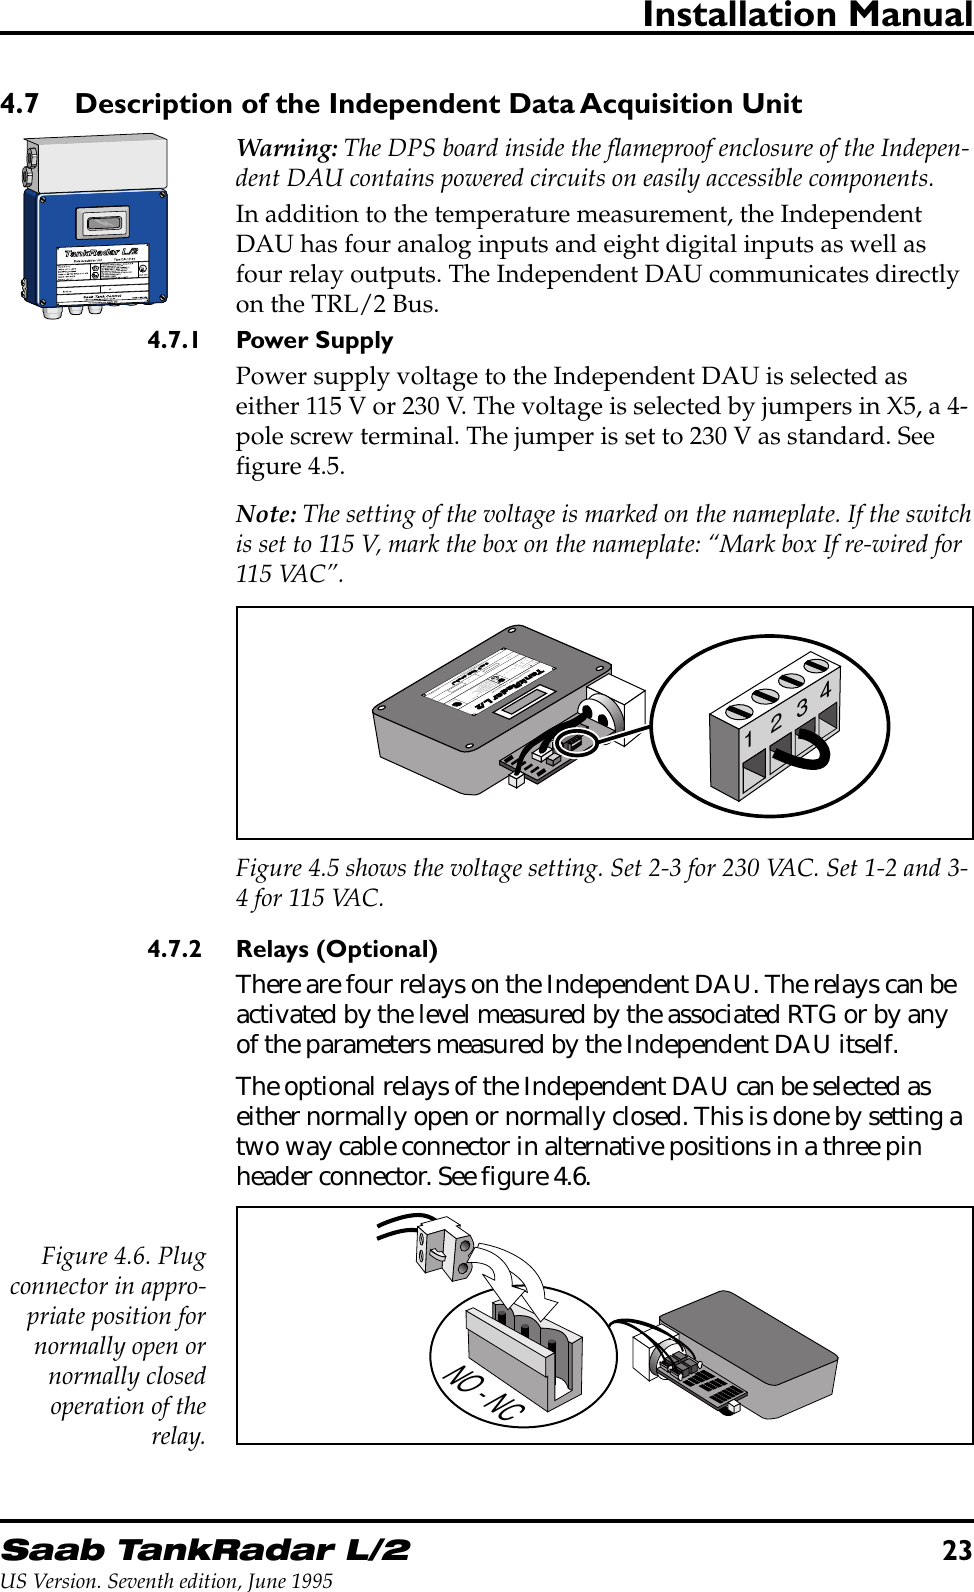 Saab TankRadar L/223US Version. Seventh edition, June 1995Installation Manual4.7 Description of the Independent Data Acquisition UnitWarning: The DPS board inside the flameproof enclosure of the Indepen-dent DAU contains powered circuits on easily accessible components.In addition to the temperature measurement, the IndependentDAU has four analog inputs and eight digital inputs as well asfour relay outputs. The Independent DAU communicates directlyon the TRL/2 Bus.4.7.1 Power SupplyPower supply voltage to the Independent DAU is selected aseither 115 V or 230 V. The voltage is selected by jumpers in X5, a 4-pole screw terminal. The jumper is set to 230 V as standard. Seefigure 4.5.Note: The setting of the voltage is marked on the nameplate. If the switchis set to 115 V, mark the box on the nameplate: “Mark box If re-wired for115 VAC”.1234TankRadar L/2Saab Tank ControlULEx©Data Acquisition Unit   Type DAU 2130A division of Saab Marine Electronics ABFor intrinsically safe circuits onlyEEx ia C T4BASEEFA Ex91C2069LISTED 939UMADE IN SWEDENTambU=28 W=1.3C=0  L =0max:inmax:in=394max:ineq eqIVDC WmADC=-40° to +65°CUI:Serial no:Ambient temperature -40° to +65°CSee service manualmay impair intrinsic safetyWarning: any substitution of componentsSee control drawing 9150 057-901provides intrinsically safe outputs.and D. Temperature Code T4. The deviceGroup CHazardous Location Class1234Figure 4.5 shows the voltage setting. Set 2-3 for 230 VAC. Set 1-2 and 3-4 for 115 VAC.4.7.2 Relays (Optional)There are four relays on the Independent DAU. The relays can beactivated by the level measured by the associated RTG or by anyof the parameters measured by the Independent DAU itself.The optional relays of the Independent DAU can be selected aseither normally open or normally closed. This is done by setting atwo way cable connector in alternative positions in a three pinheader connector. See figure 4.6.NO - NCFigure 4.6. Plugconnector in appro-priate position fornormally open ornormally closedoperation of therelay.